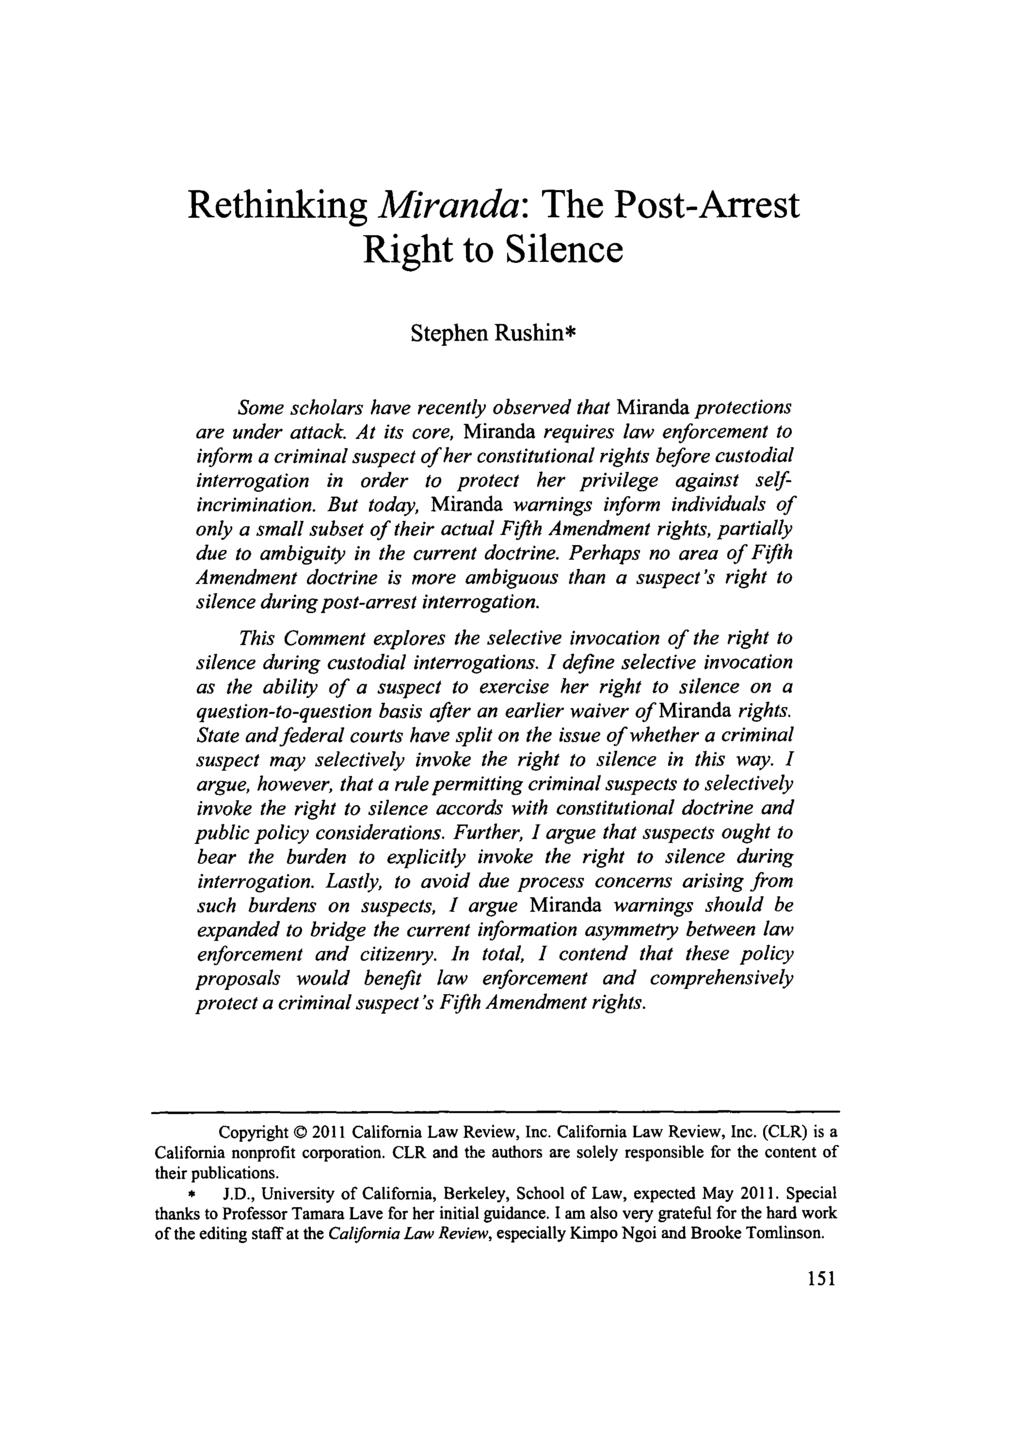 Rethinking Miranda: The Post-Arrest Right to Silence Stephen Rushin* Some scholars have recently observed that Miranda protections are under attack.